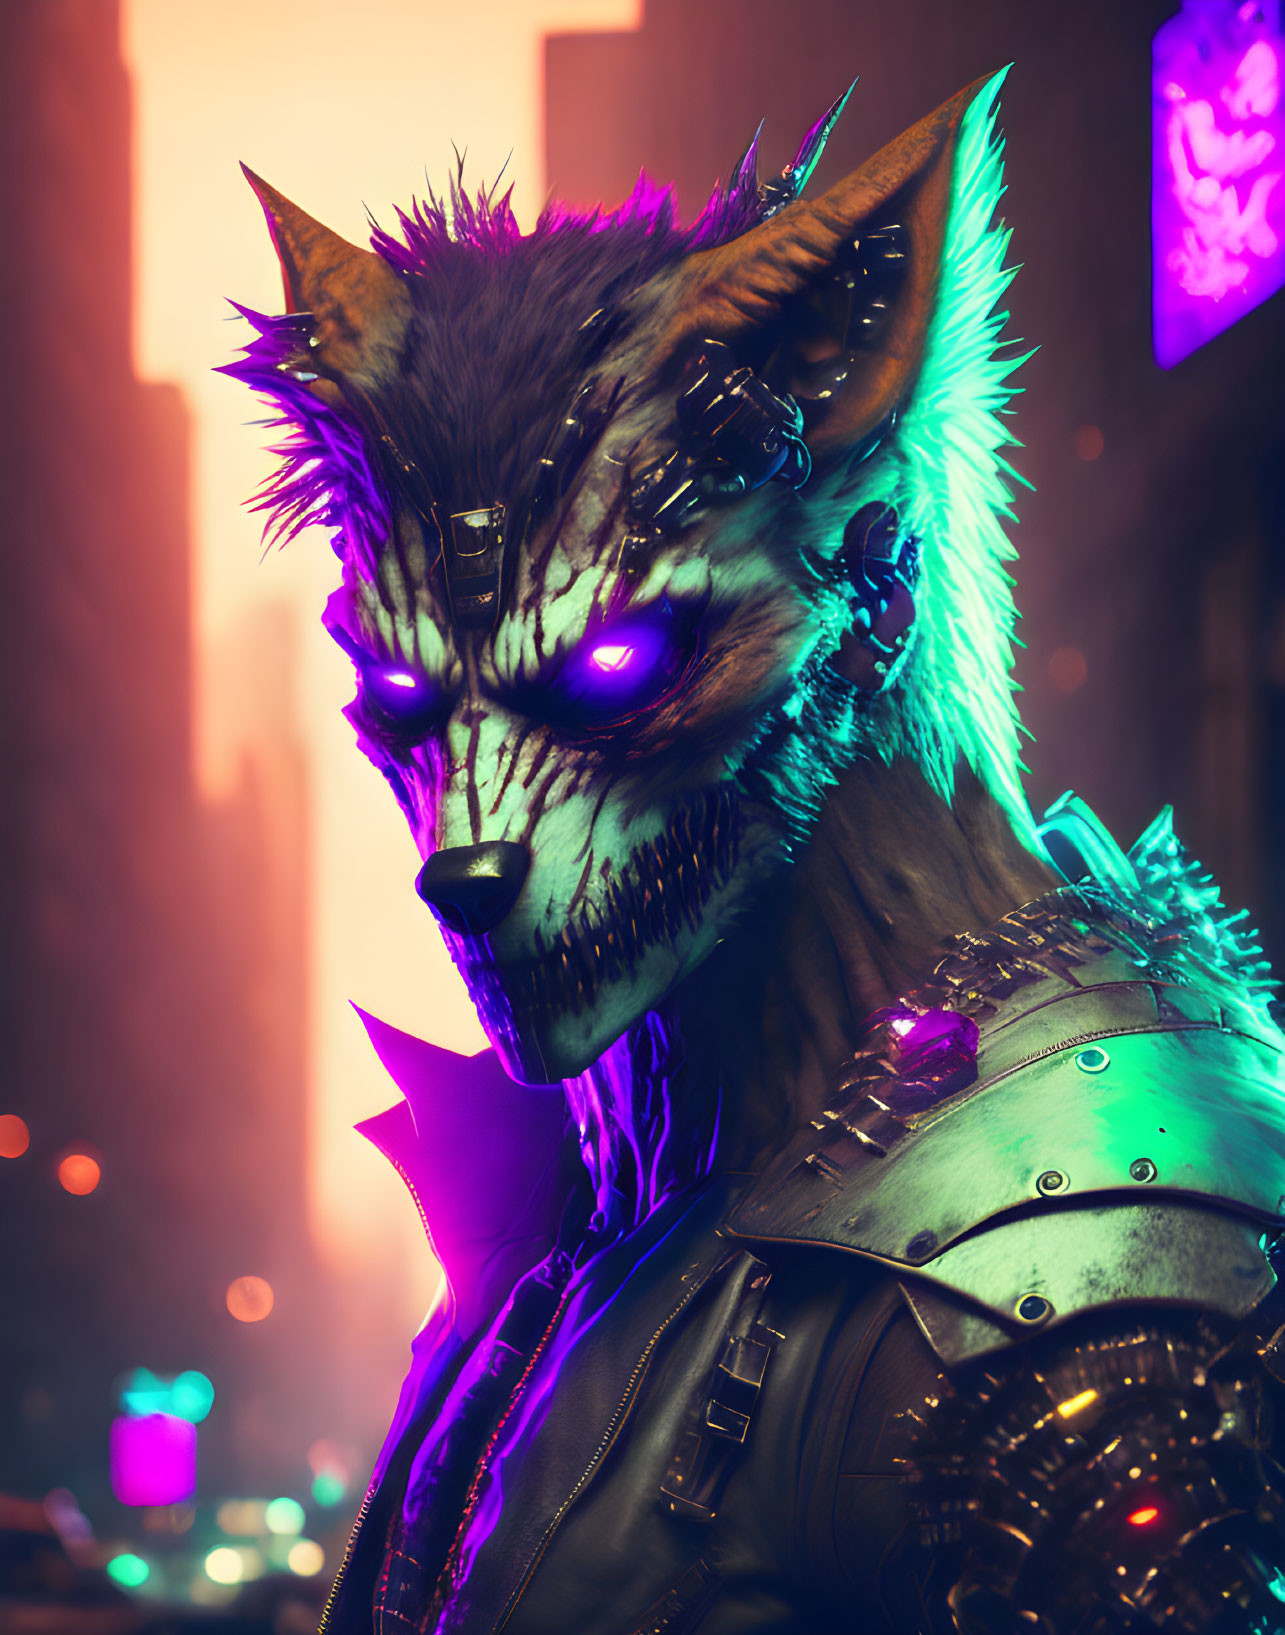 Cyberpunk aesthetic individual with glowing purple eyes and wolf mask in urban neon lights.